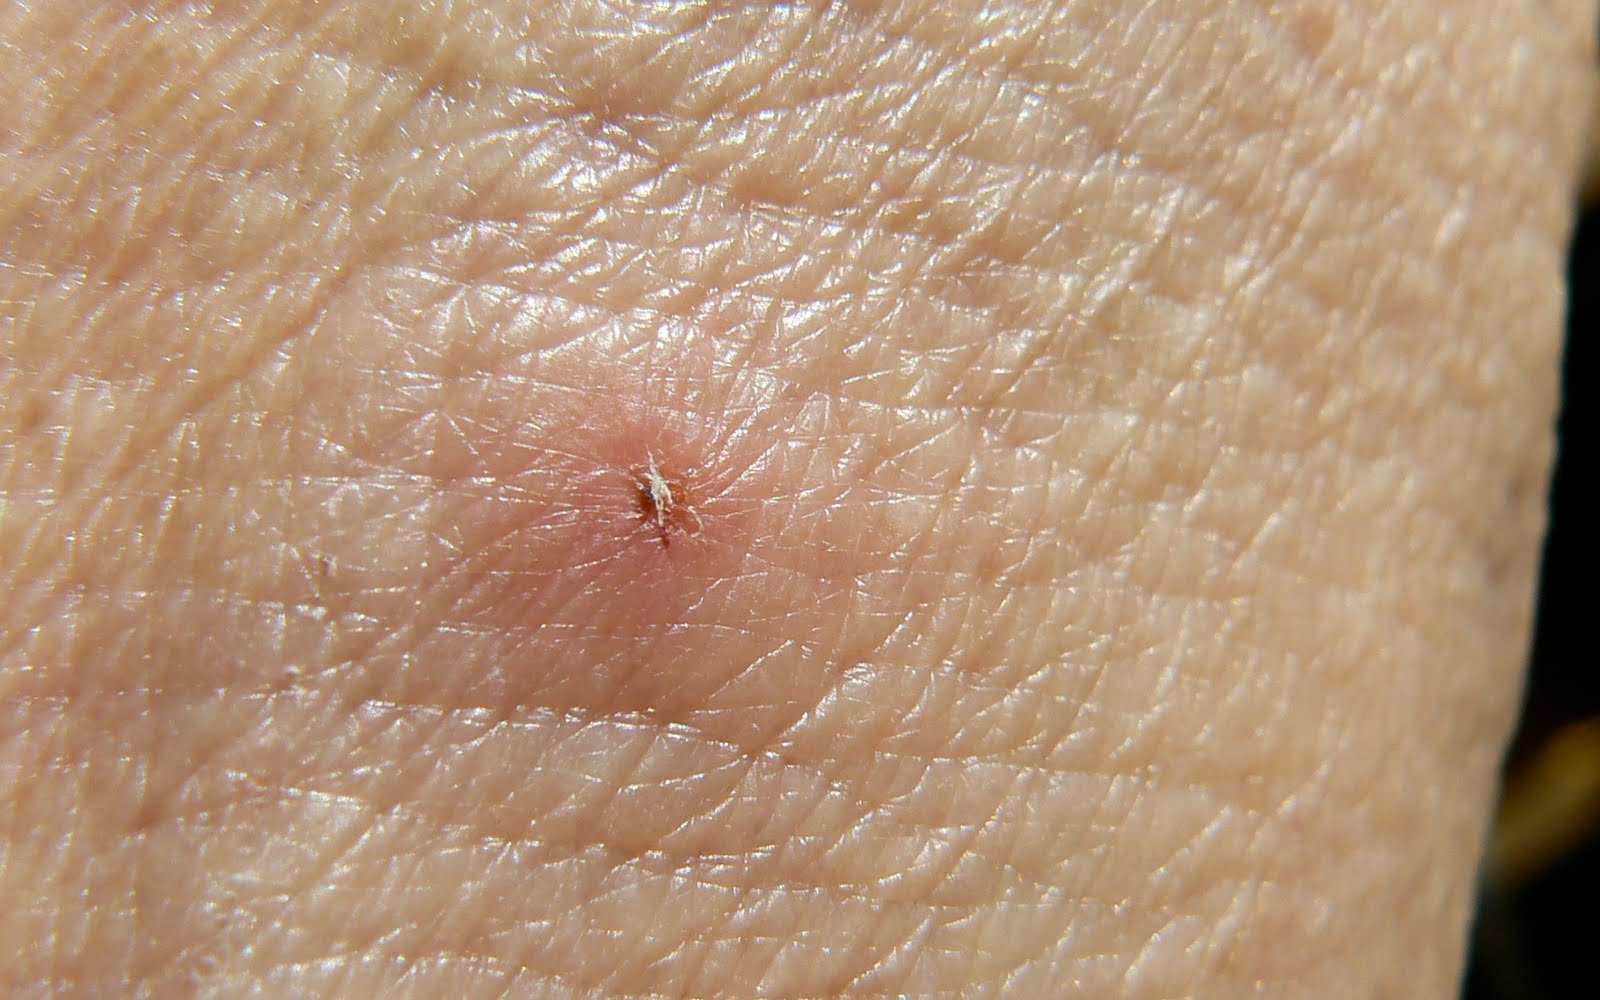 How do you remove a tick from a human body?